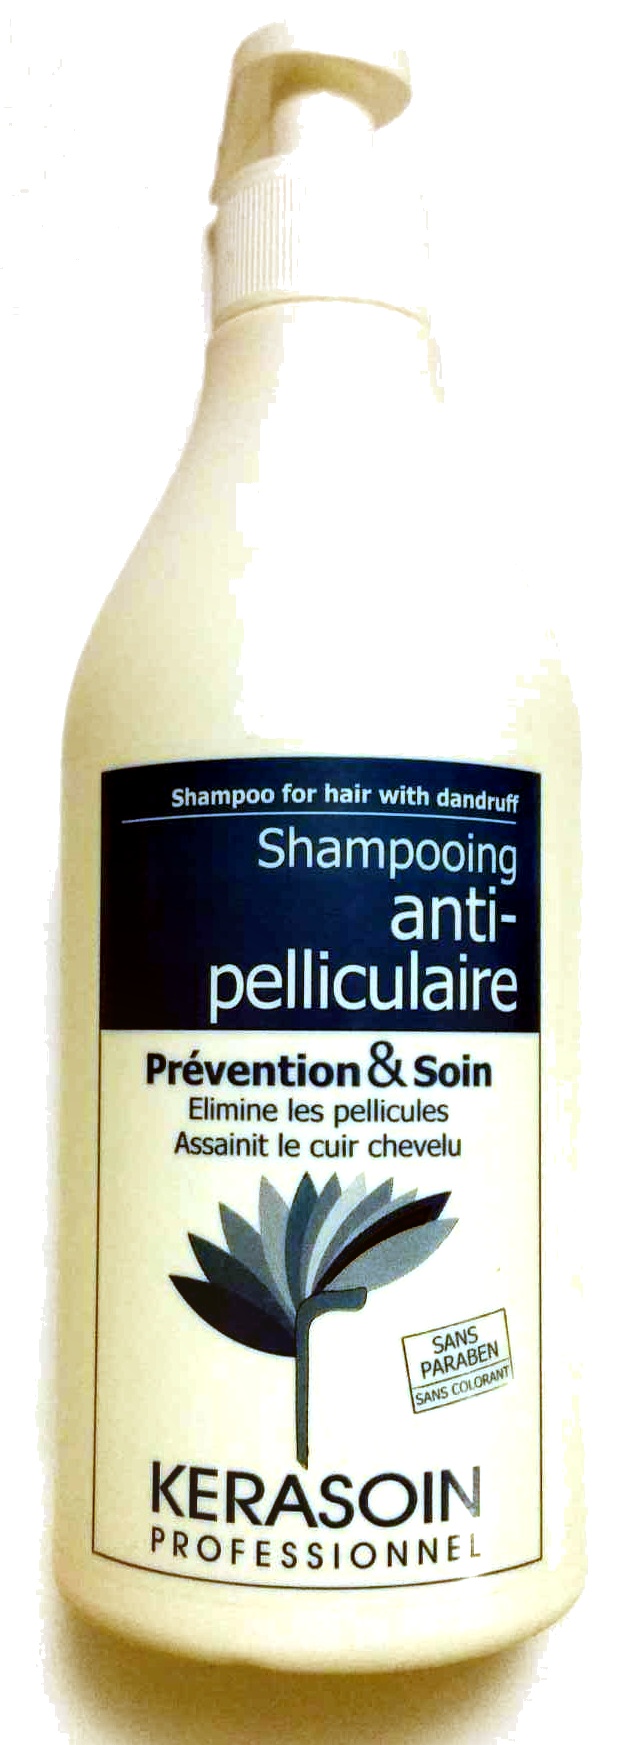 Kerasoin Professionel, Shampooing anti-pelliculaire, Prévention & Soin - Product - fr